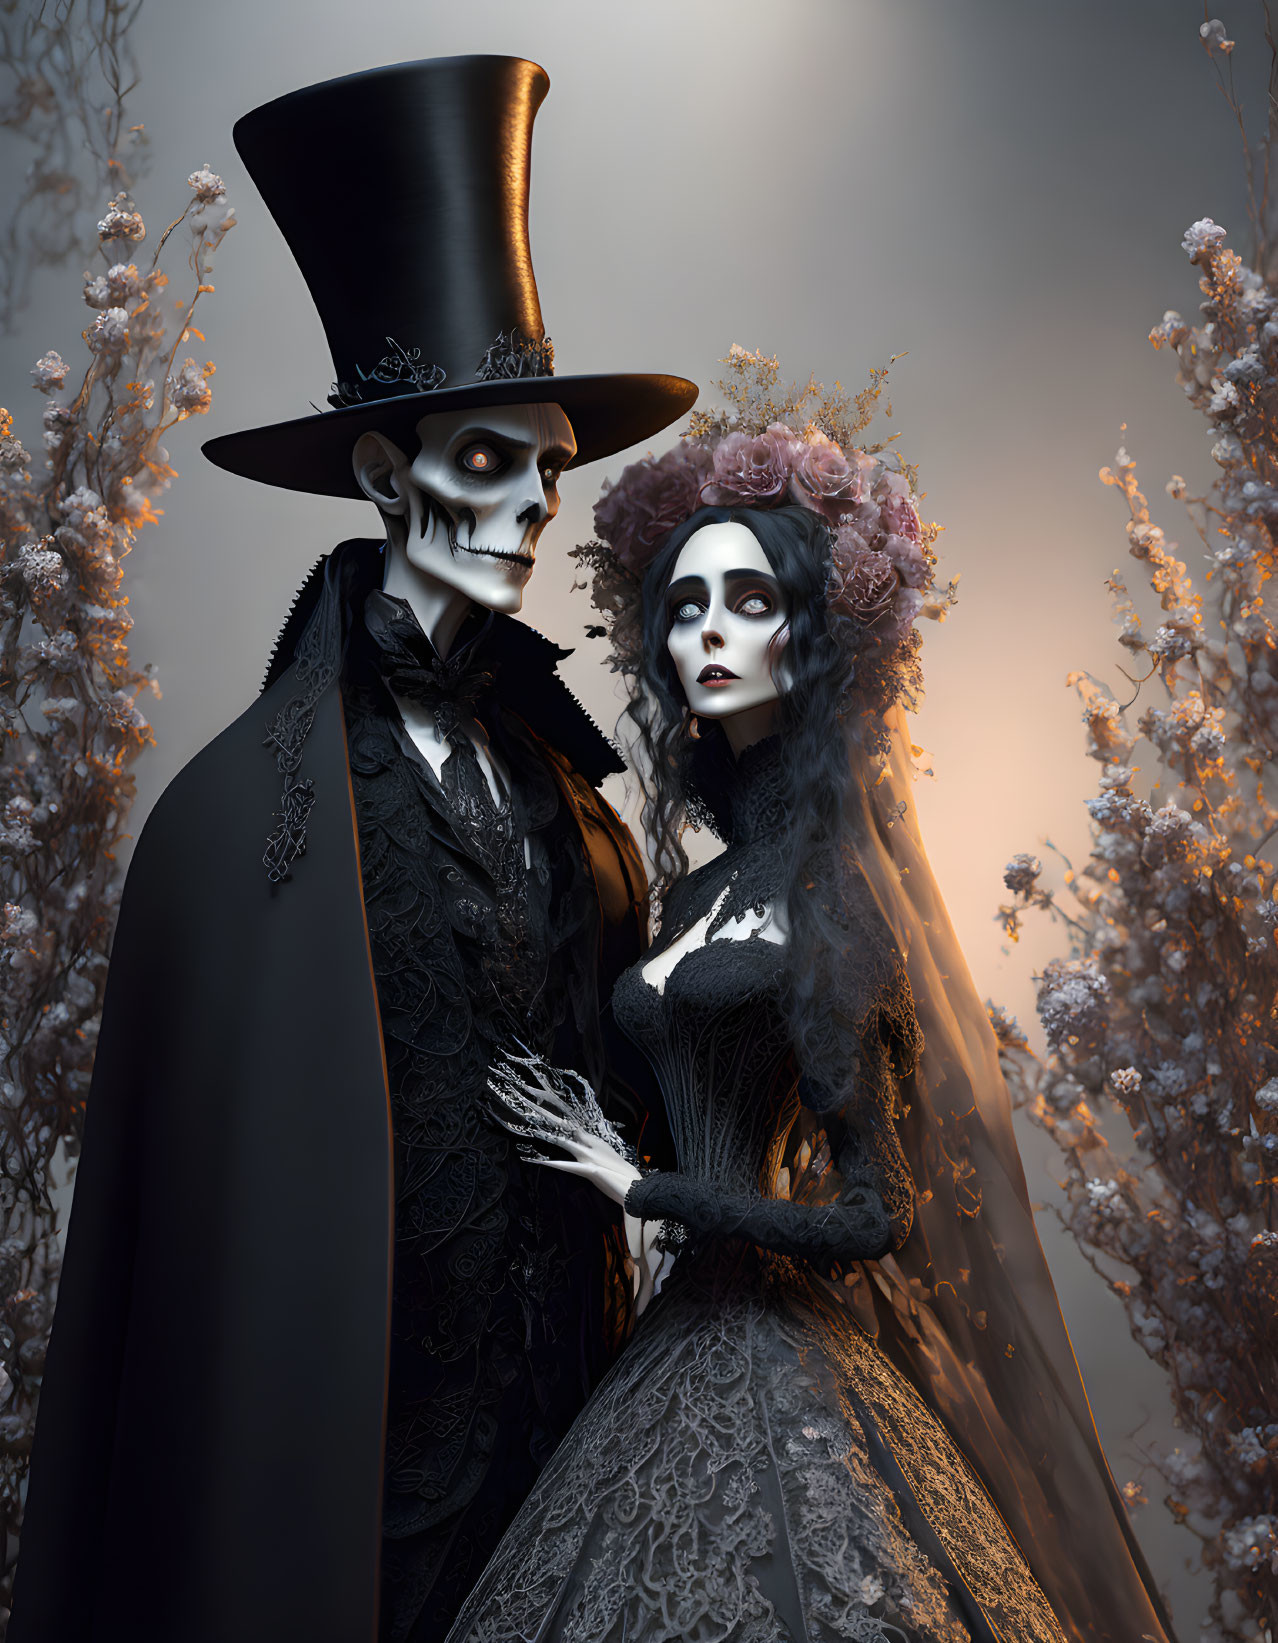 Gothic bride and groom in Victorian wedding attire amid faded blooms